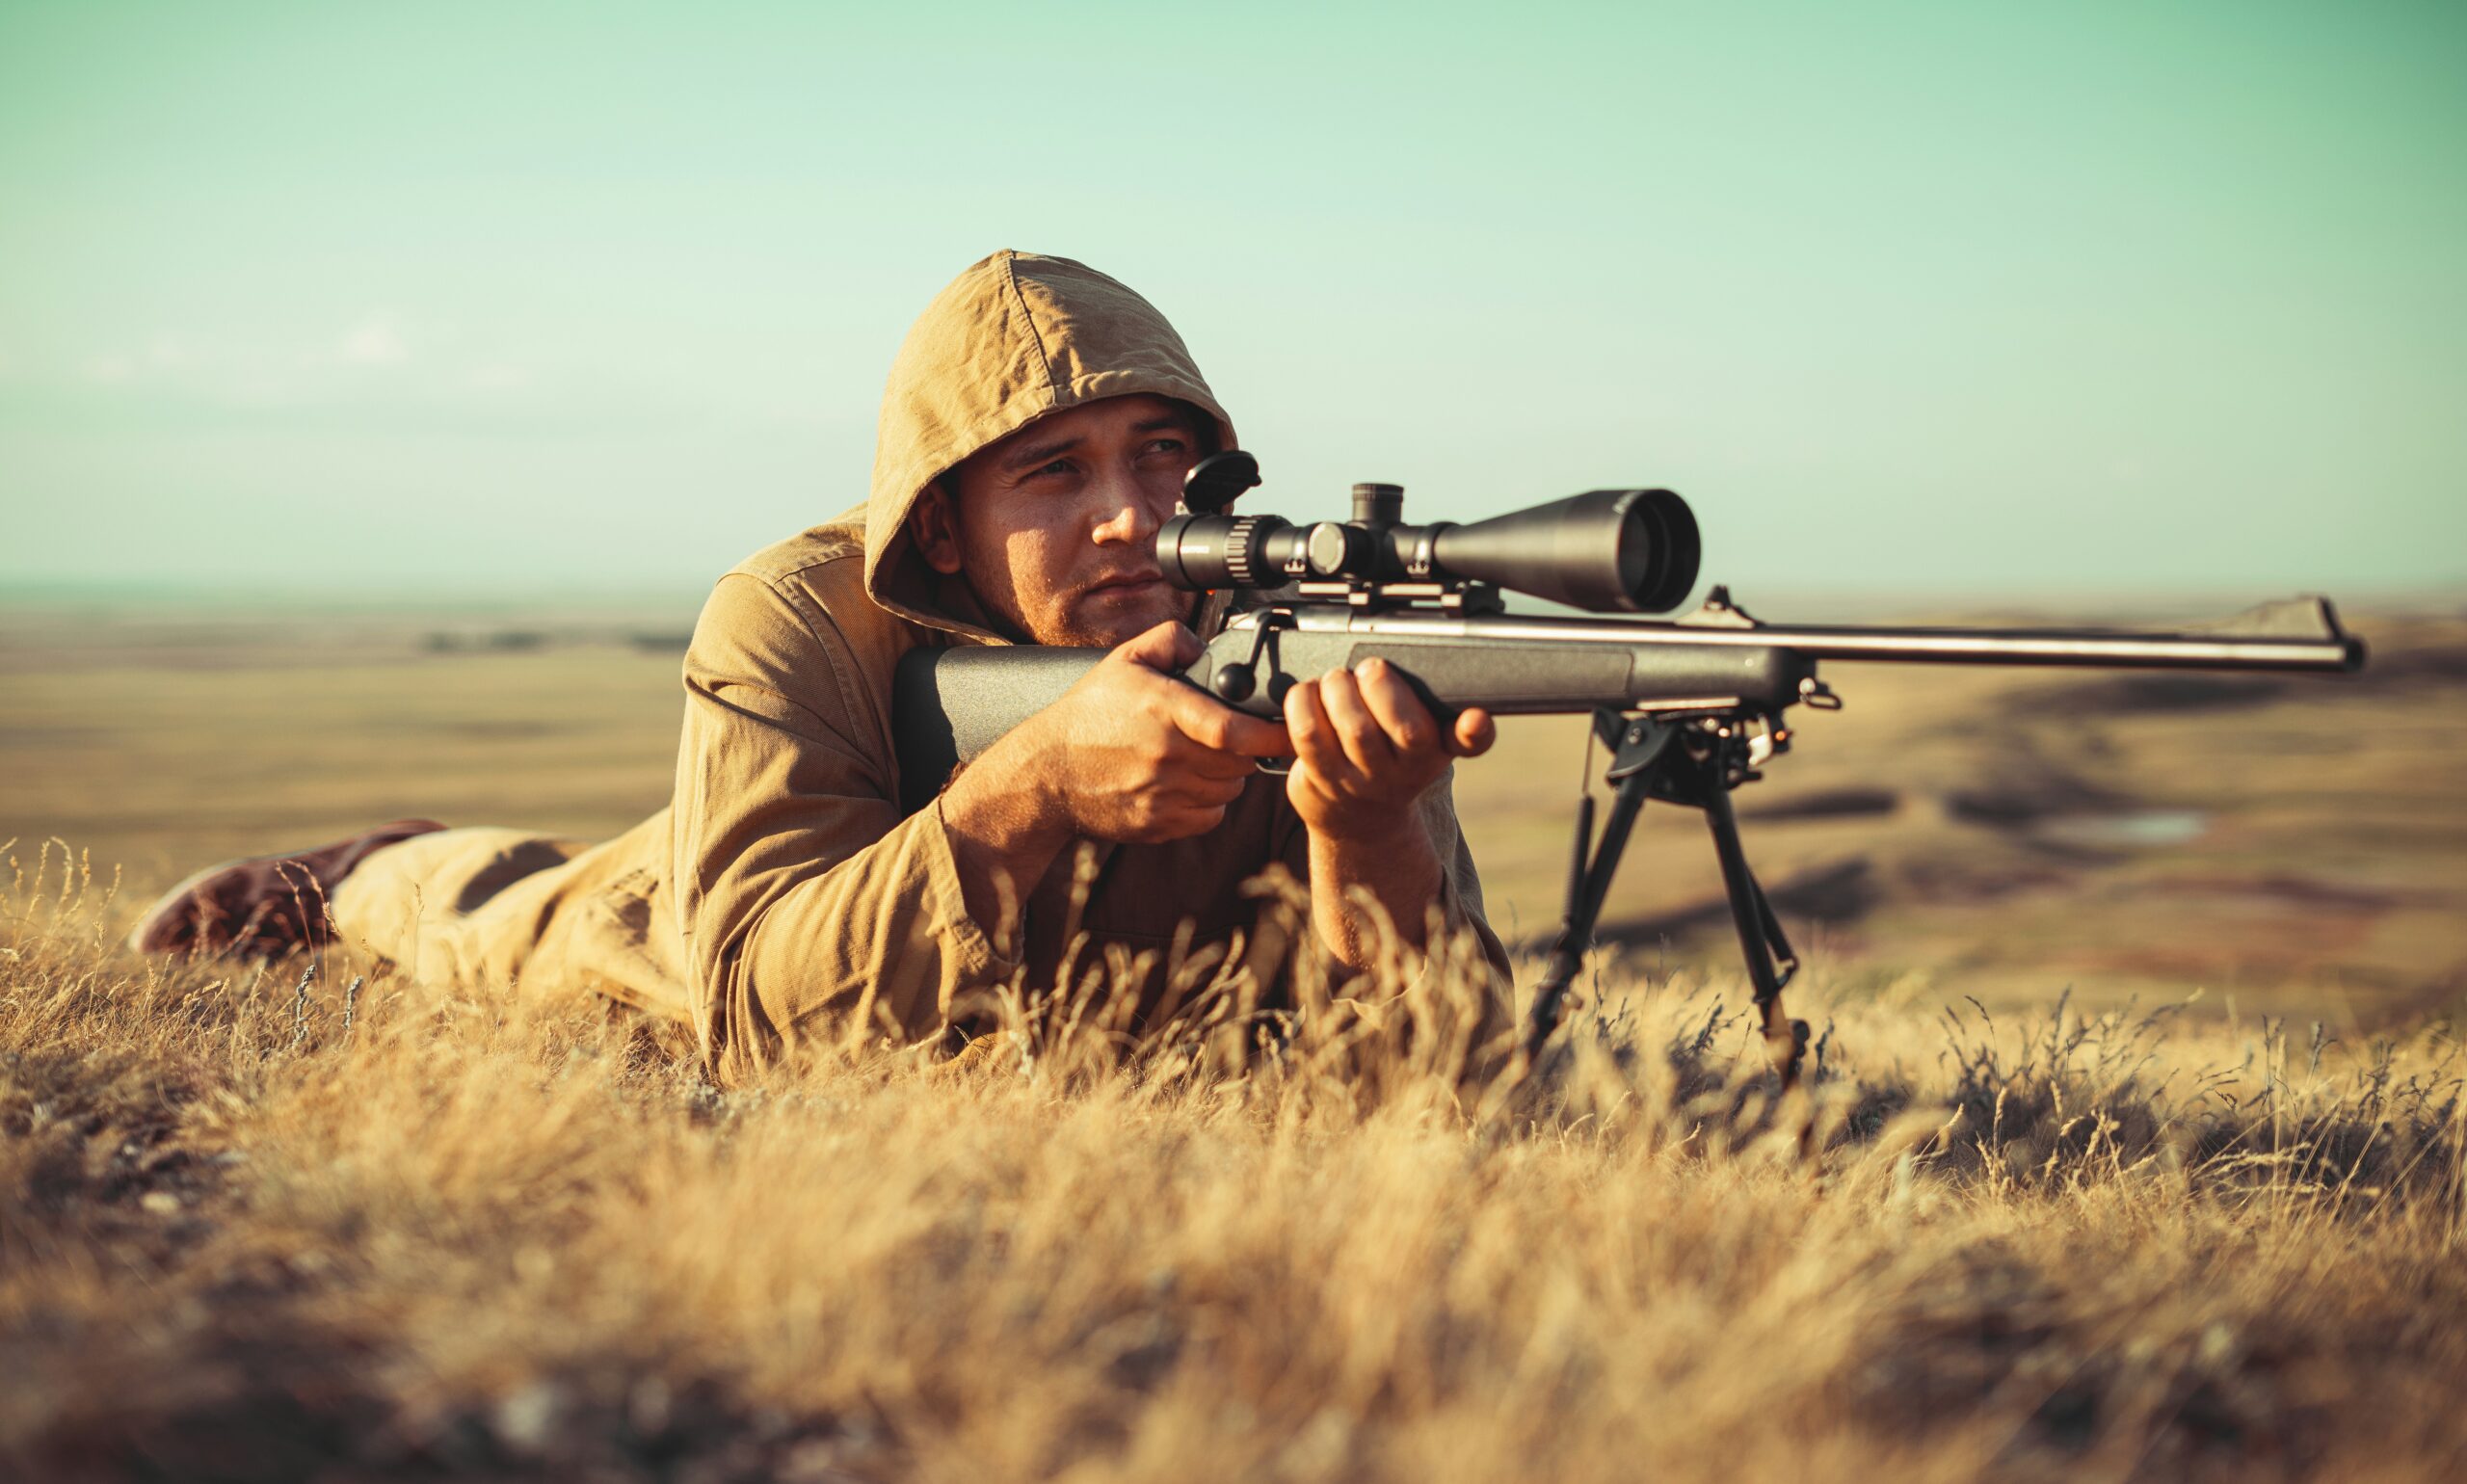 What Are The Different Types Of Reticles Available For Hunting Scopes?